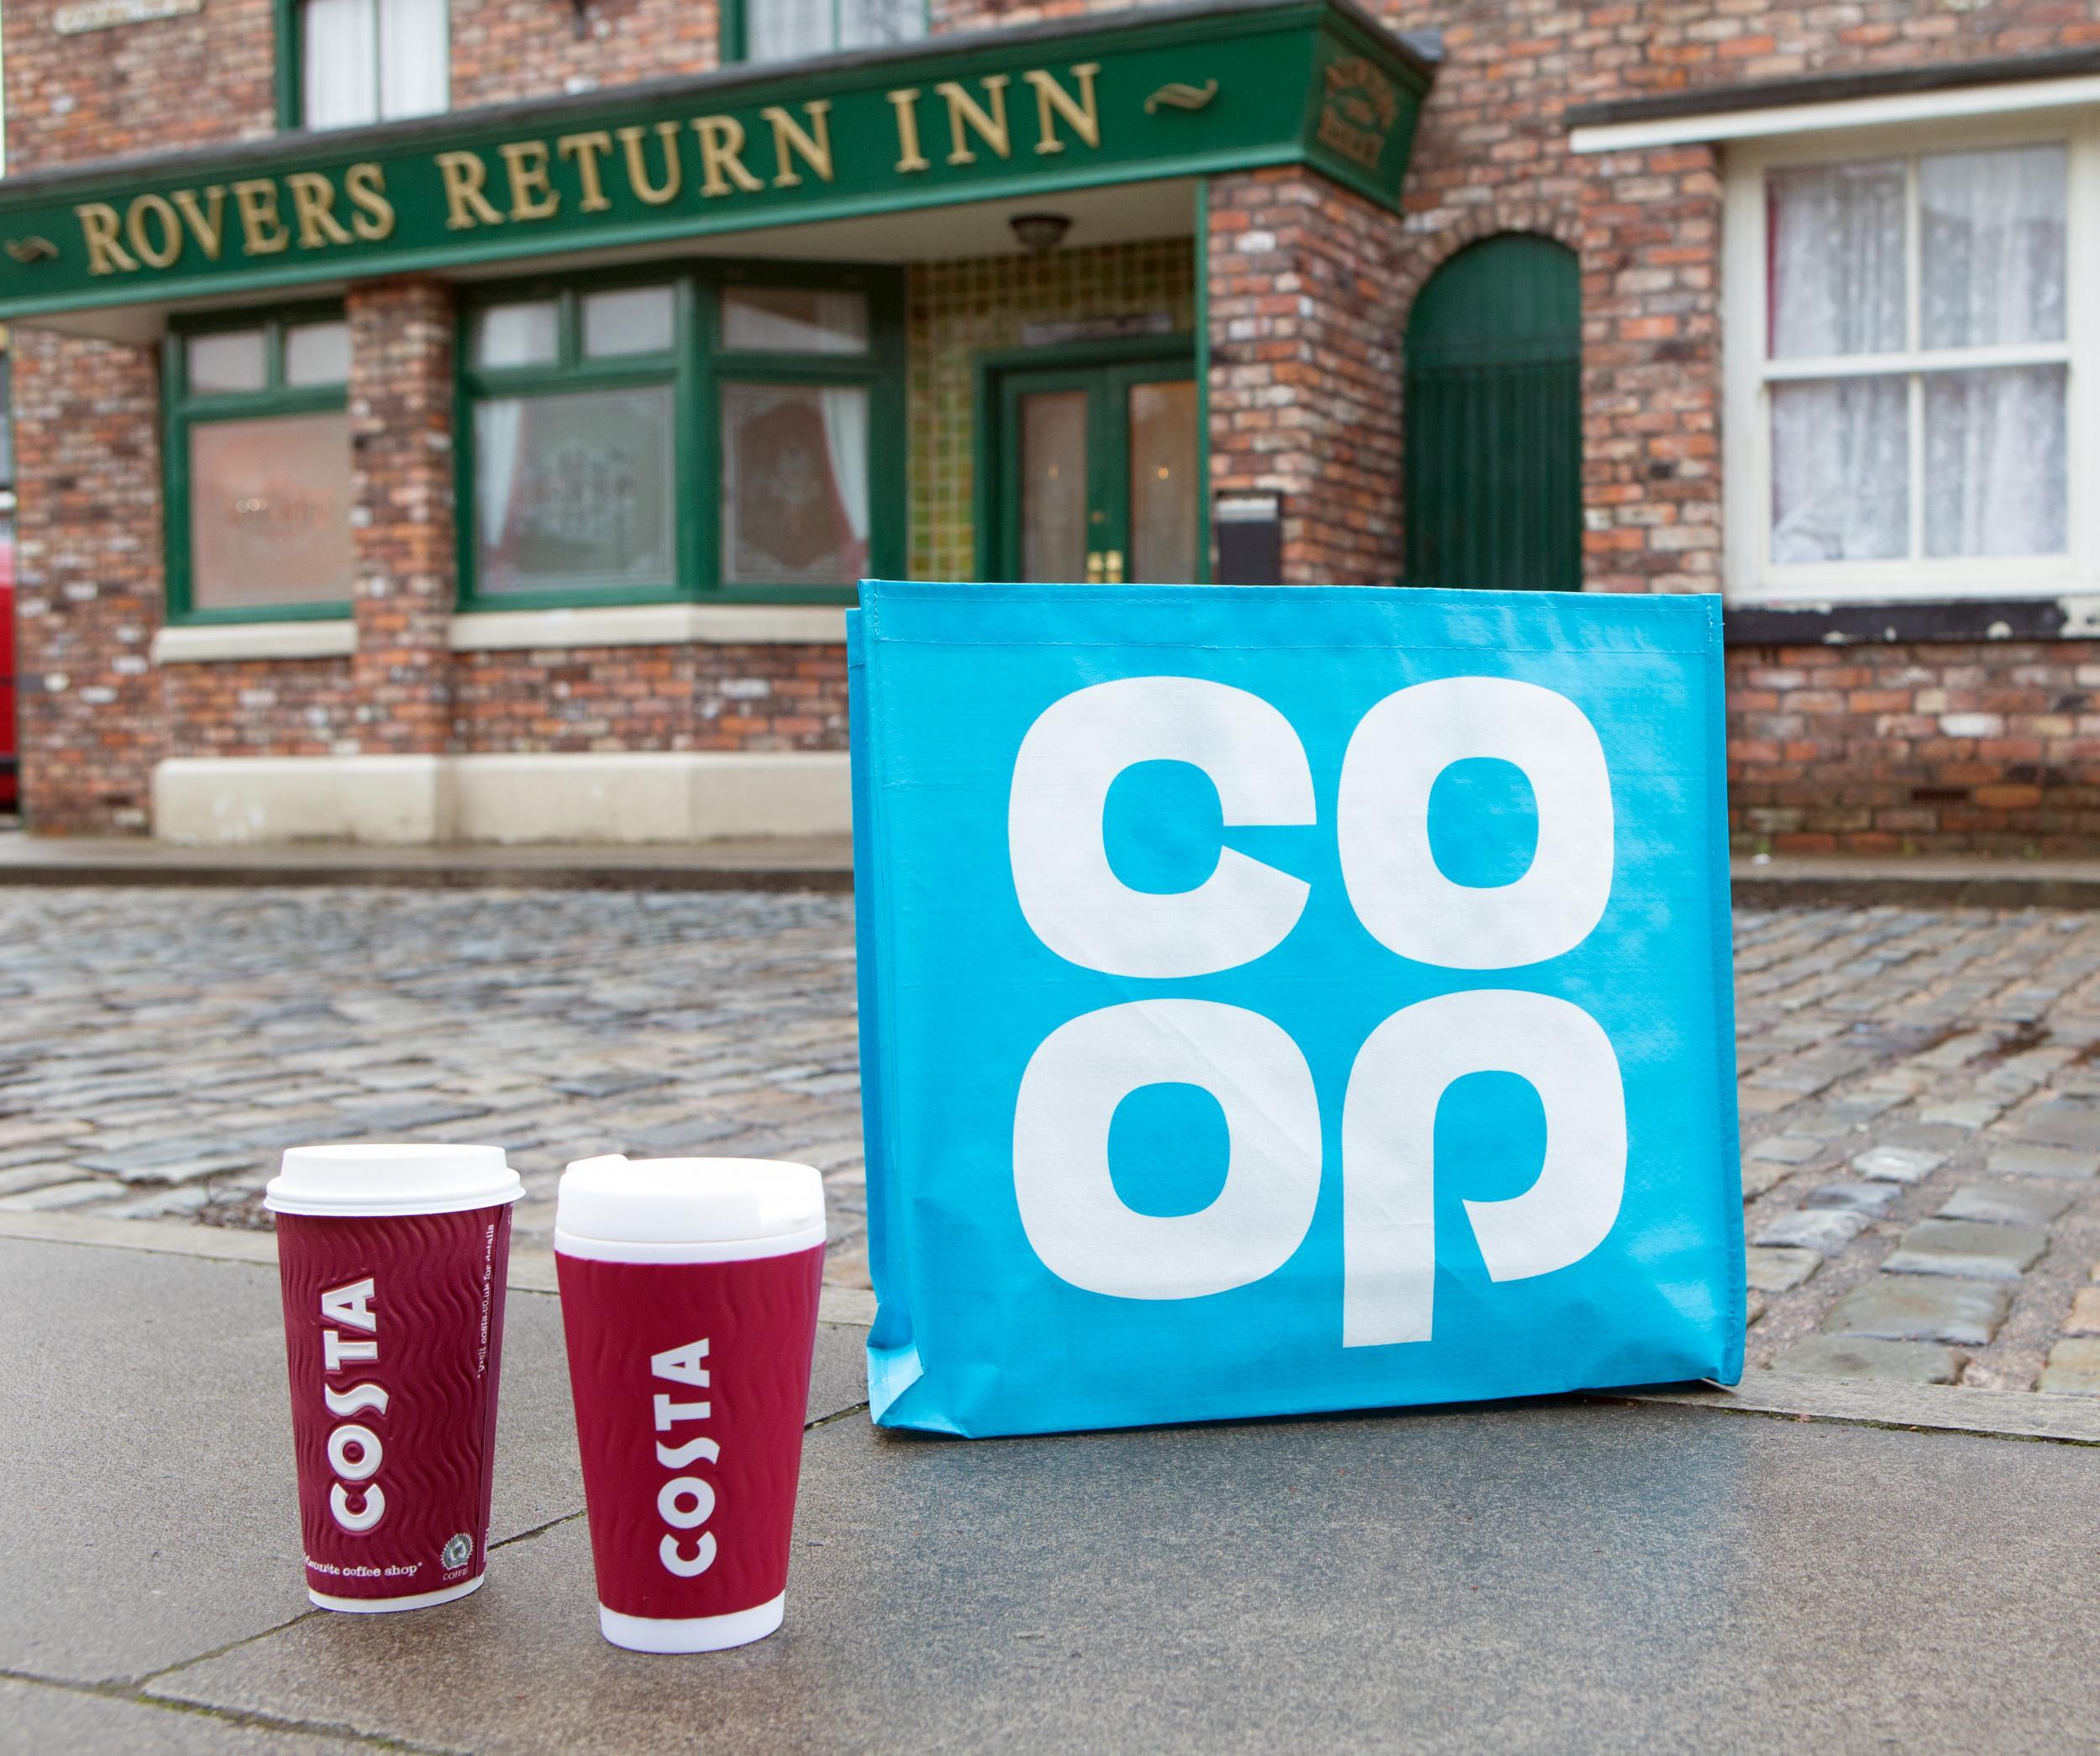 Lack of street cred? Posters, bags and cups from both chains will also be used by characters in the UK’s longest running soap